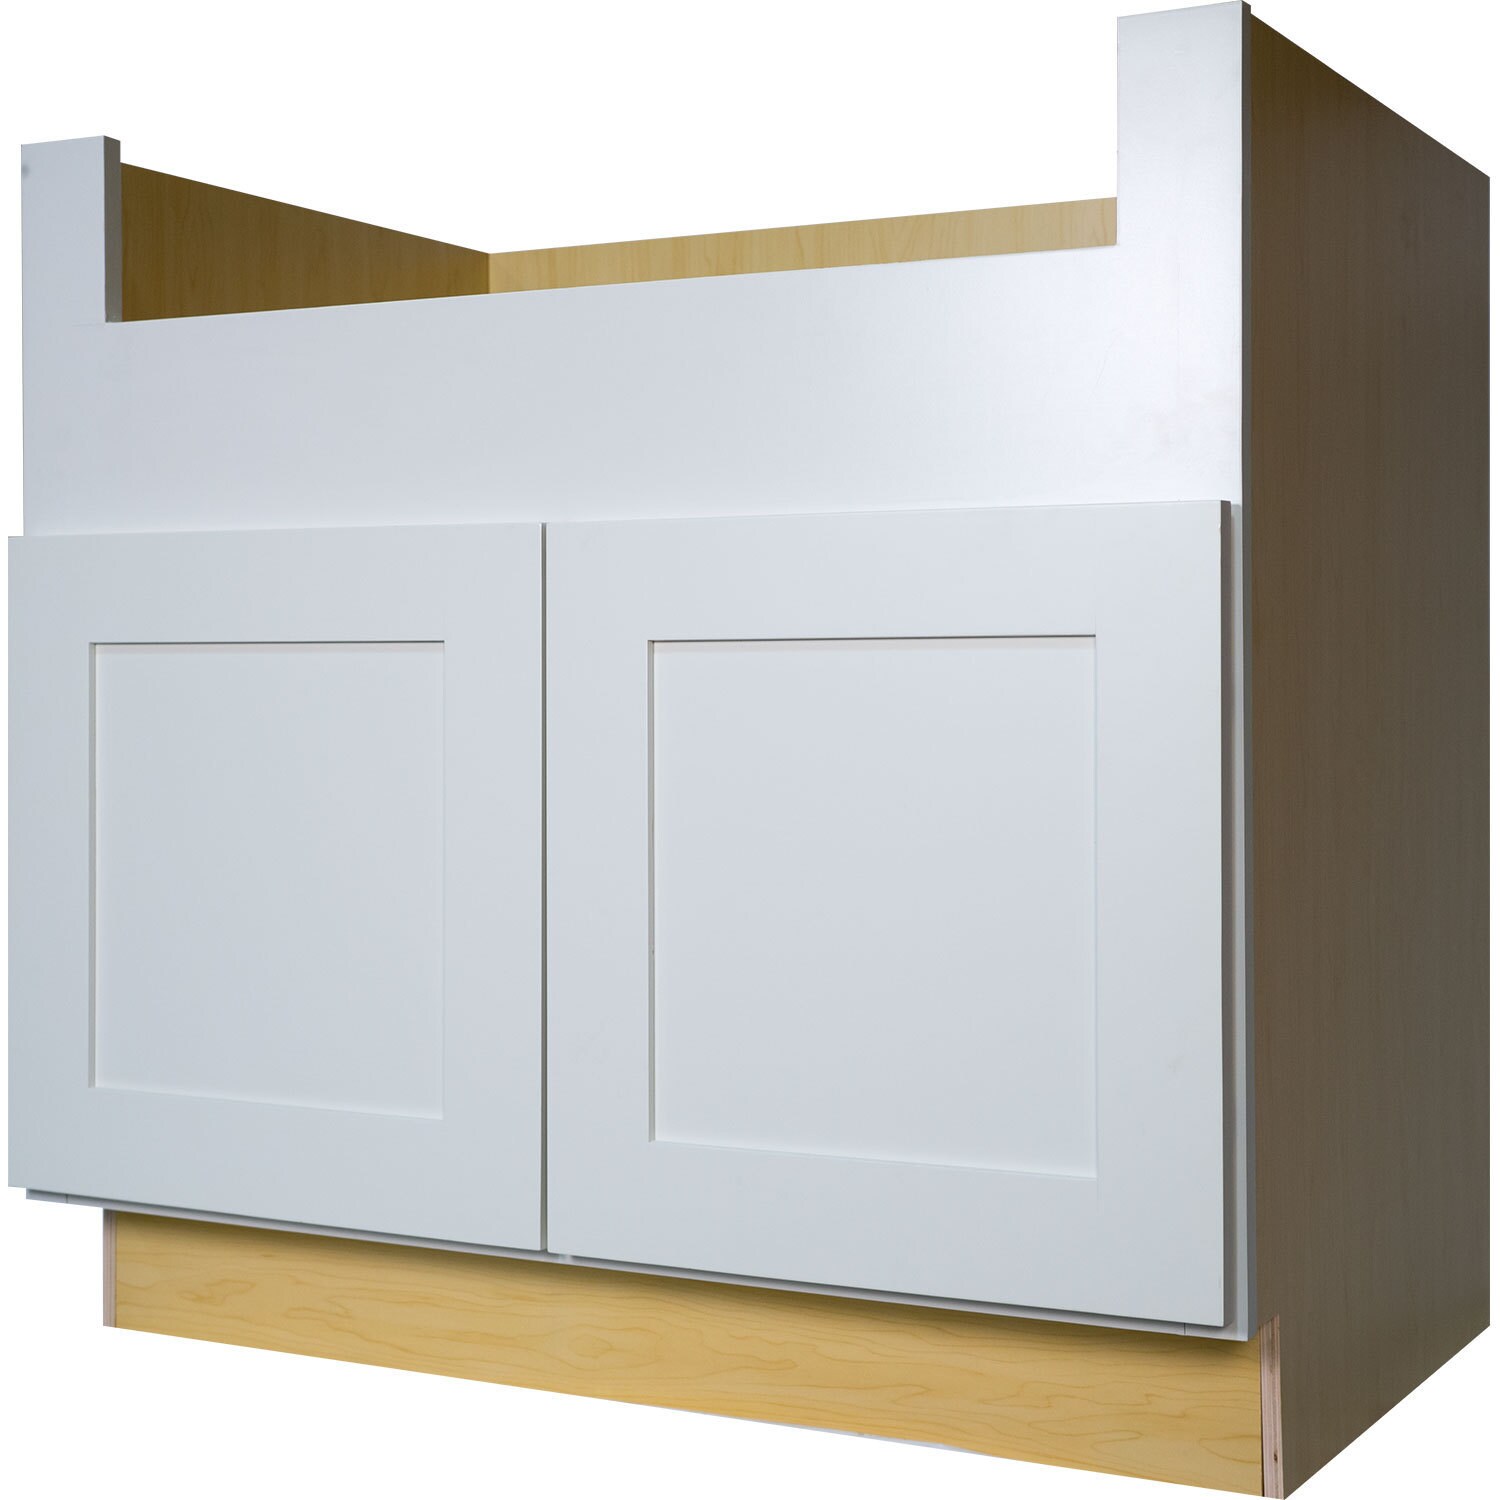 Everyday Cabinets 36 Inch White Shaker Farmhouse Apron Sink Base Kitchen Cabinet